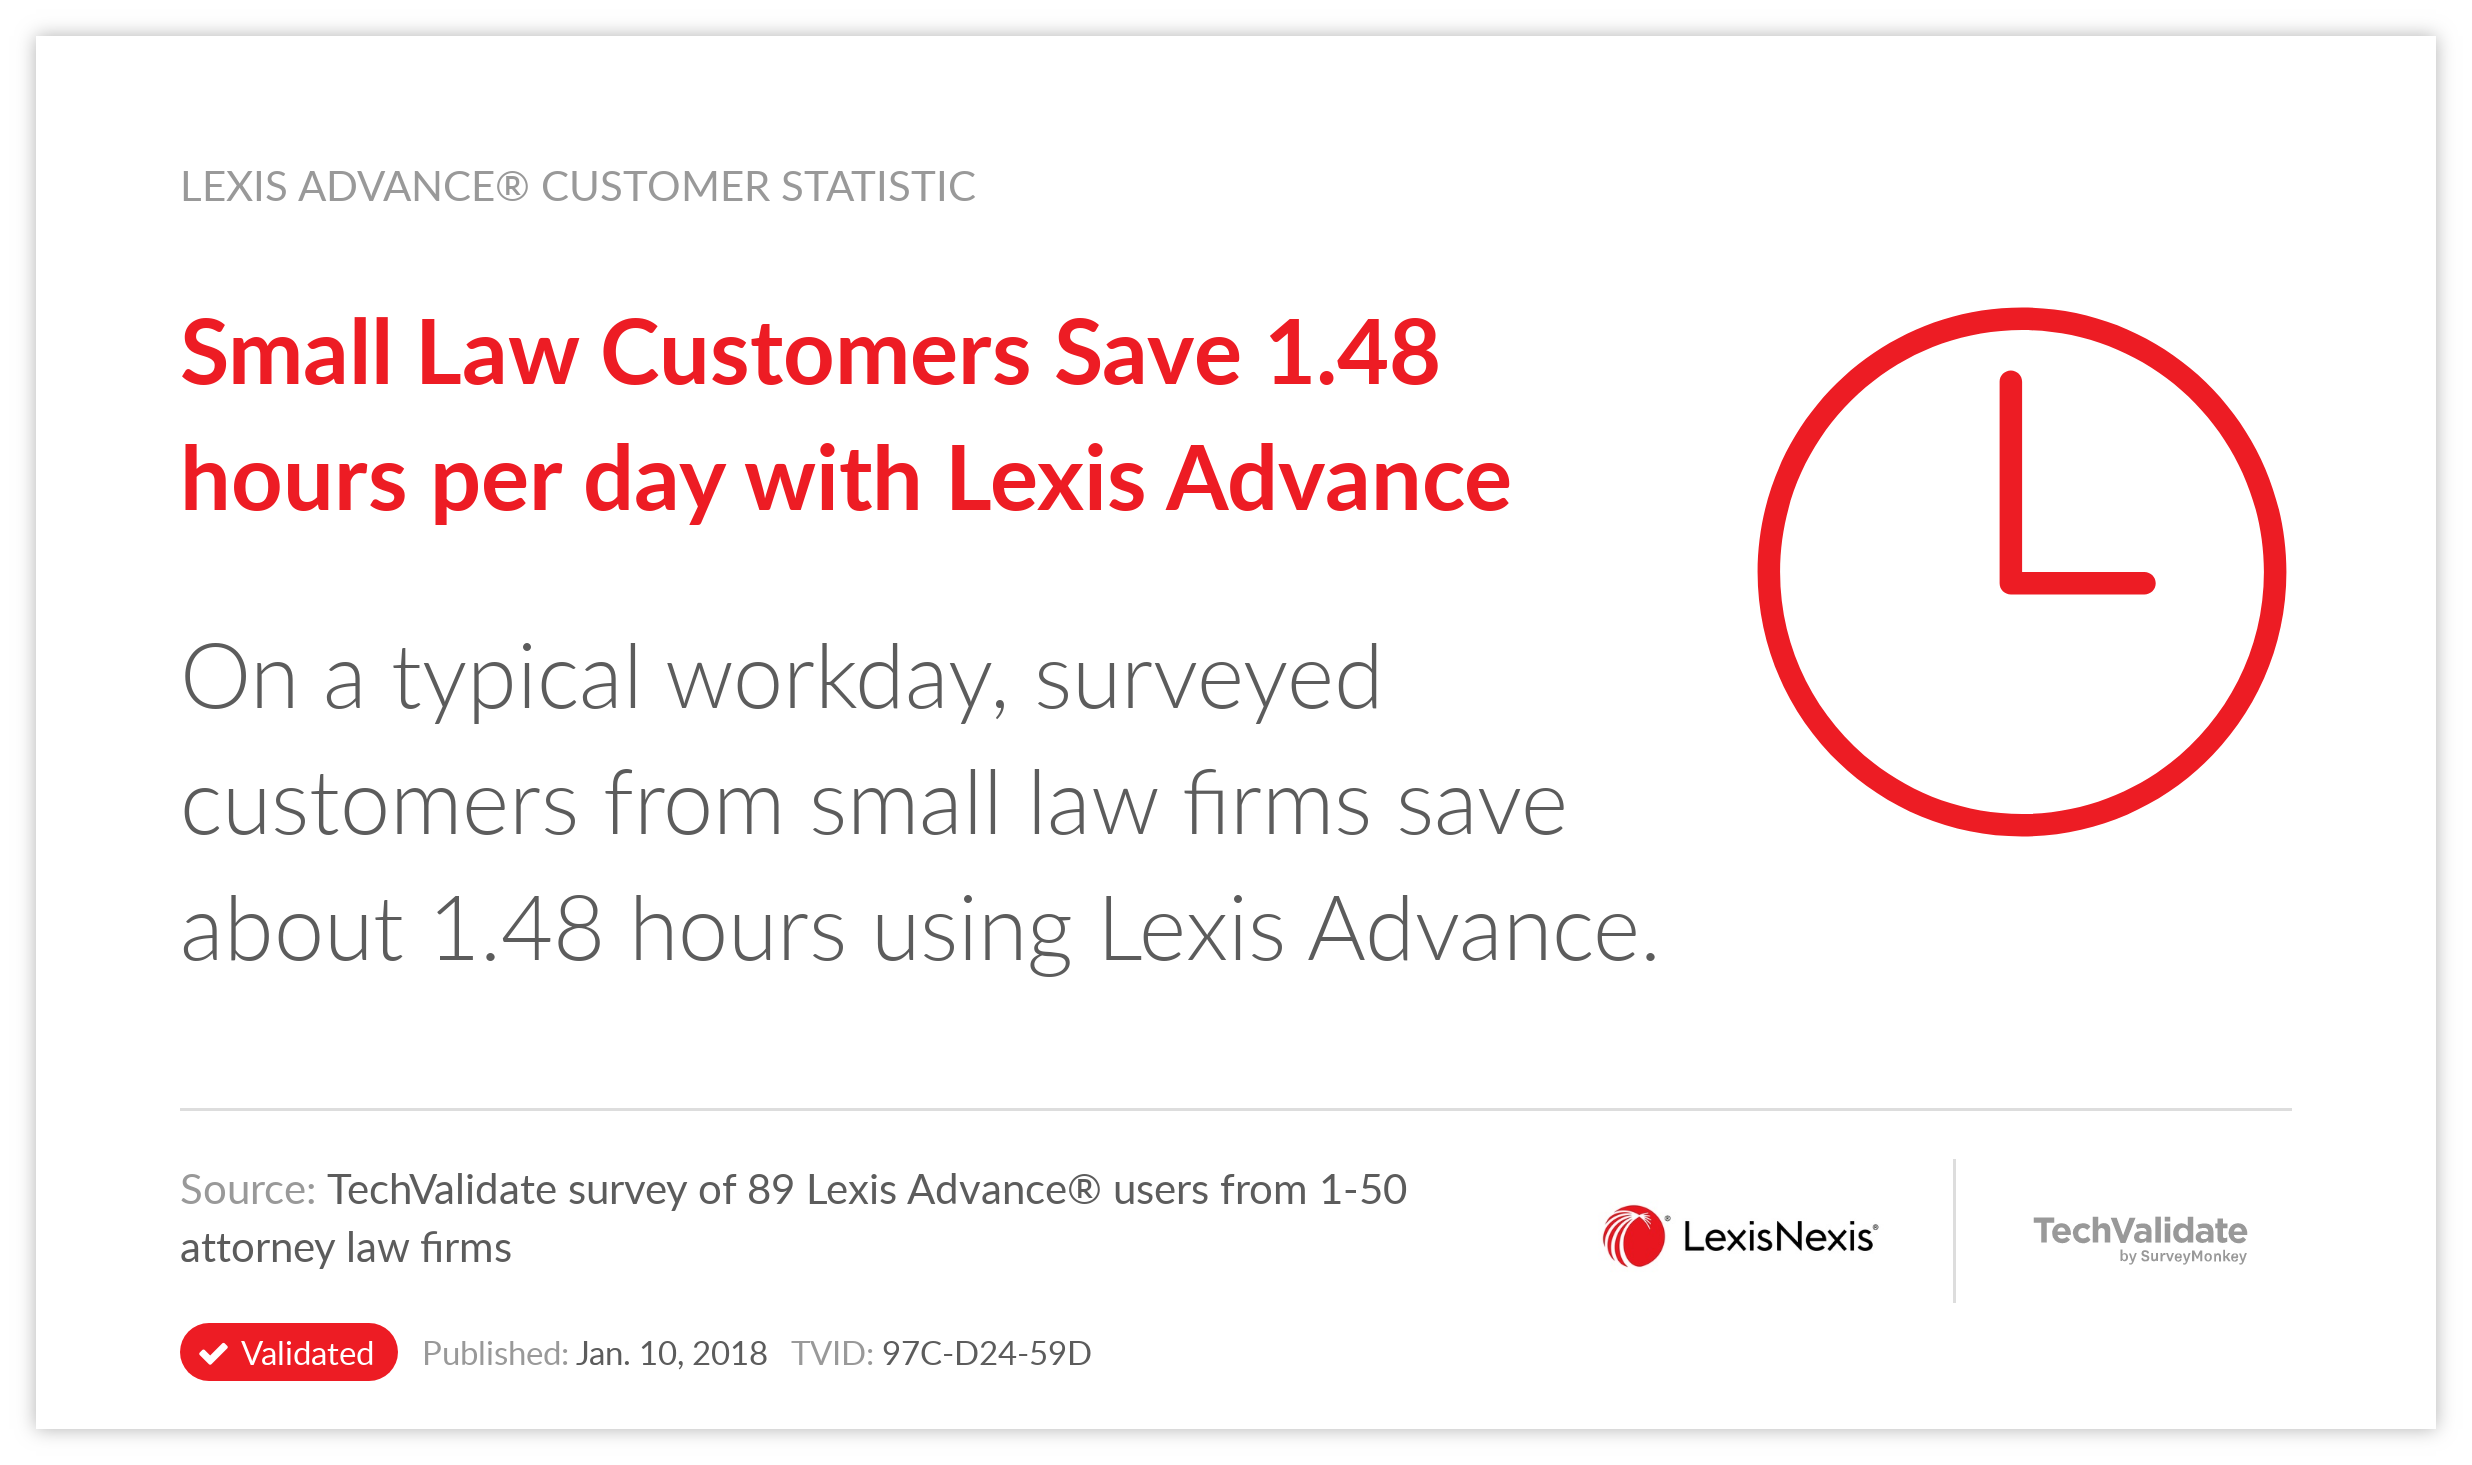 Small Law Customers Save 1.48 hours per day with Lexis Advance